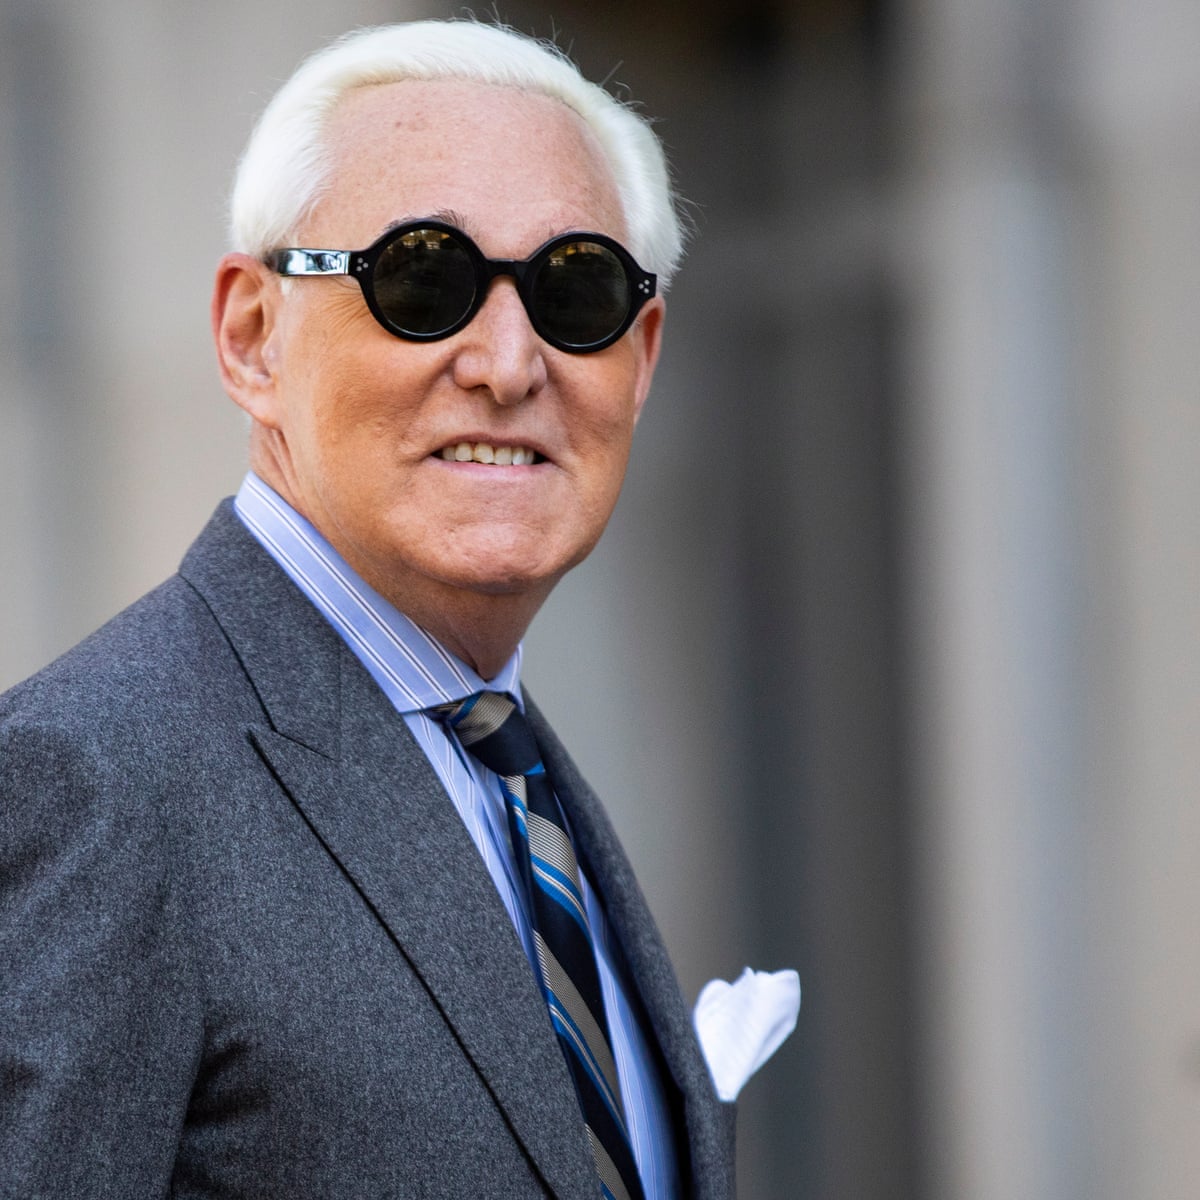 Roger who stones is Roger Stone’s